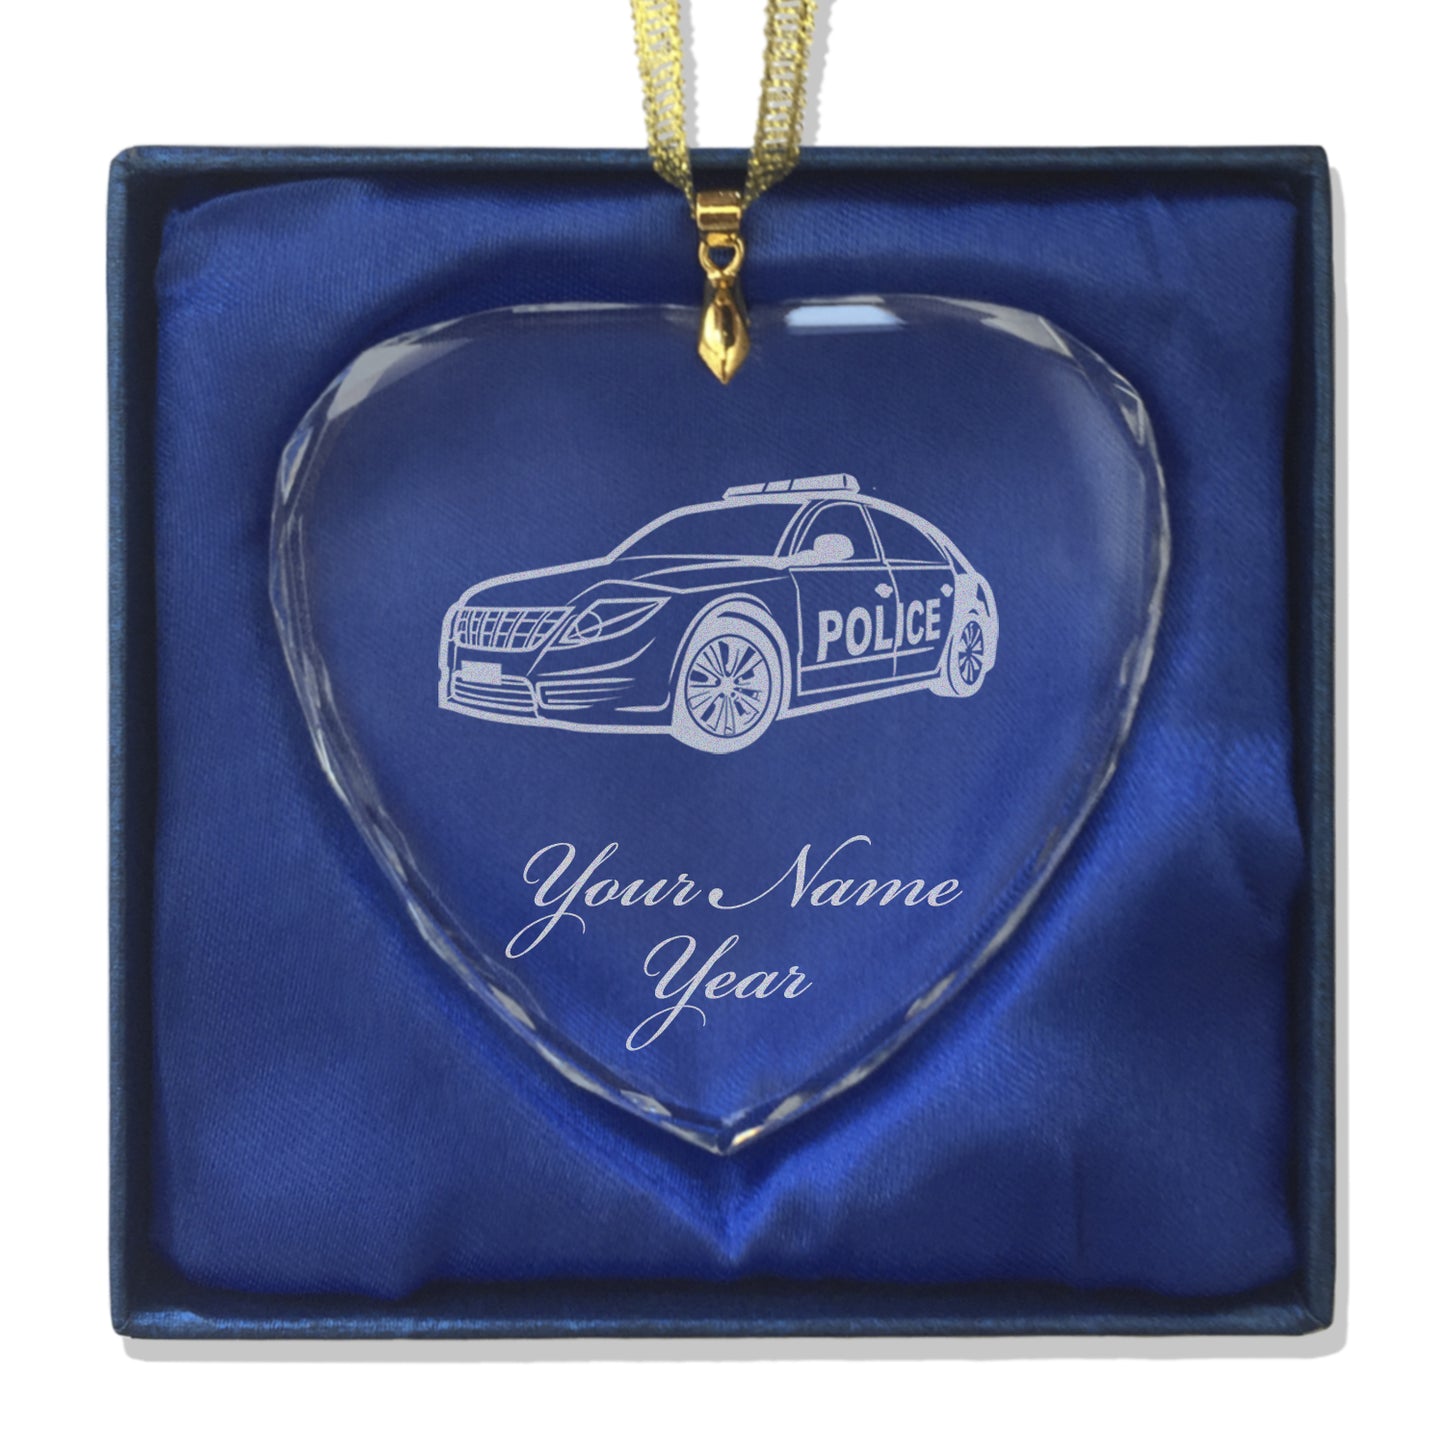 LaserGram Christmas Ornament, Police Car, Personalized Engraving Included (Heart Shape)